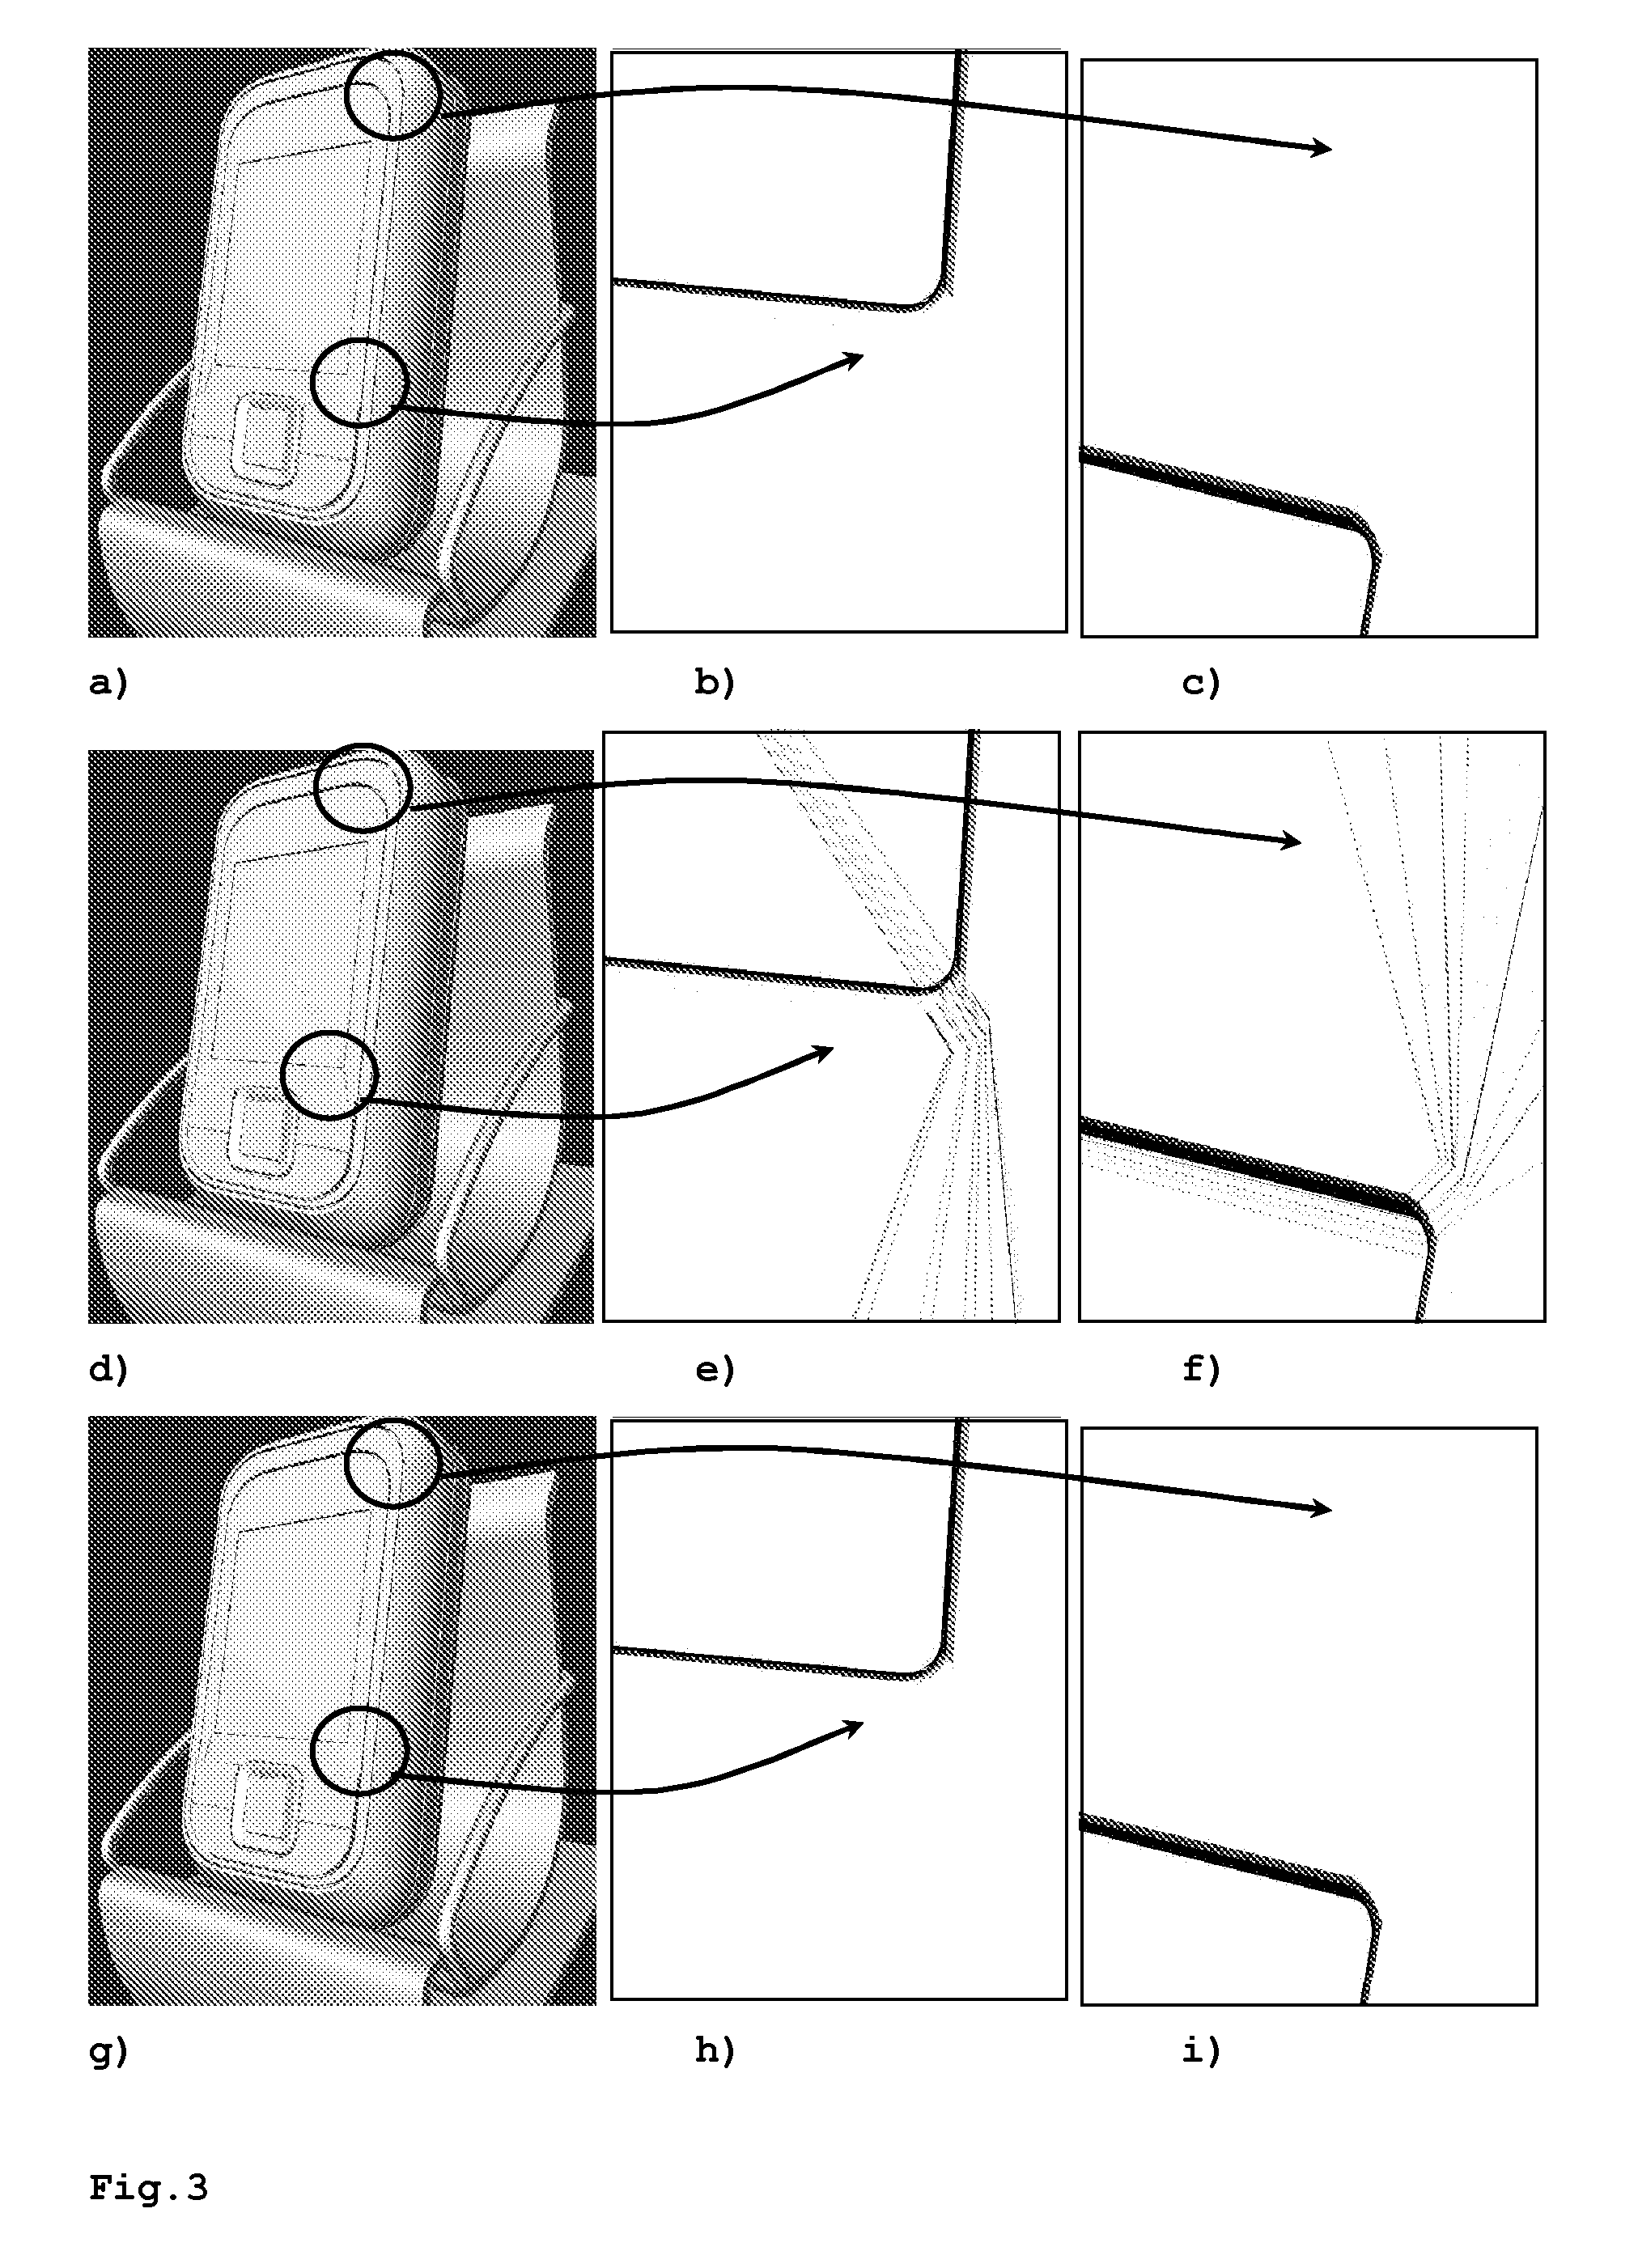 Method for encoding/decoding a 3D mesh model that comprises one or more components